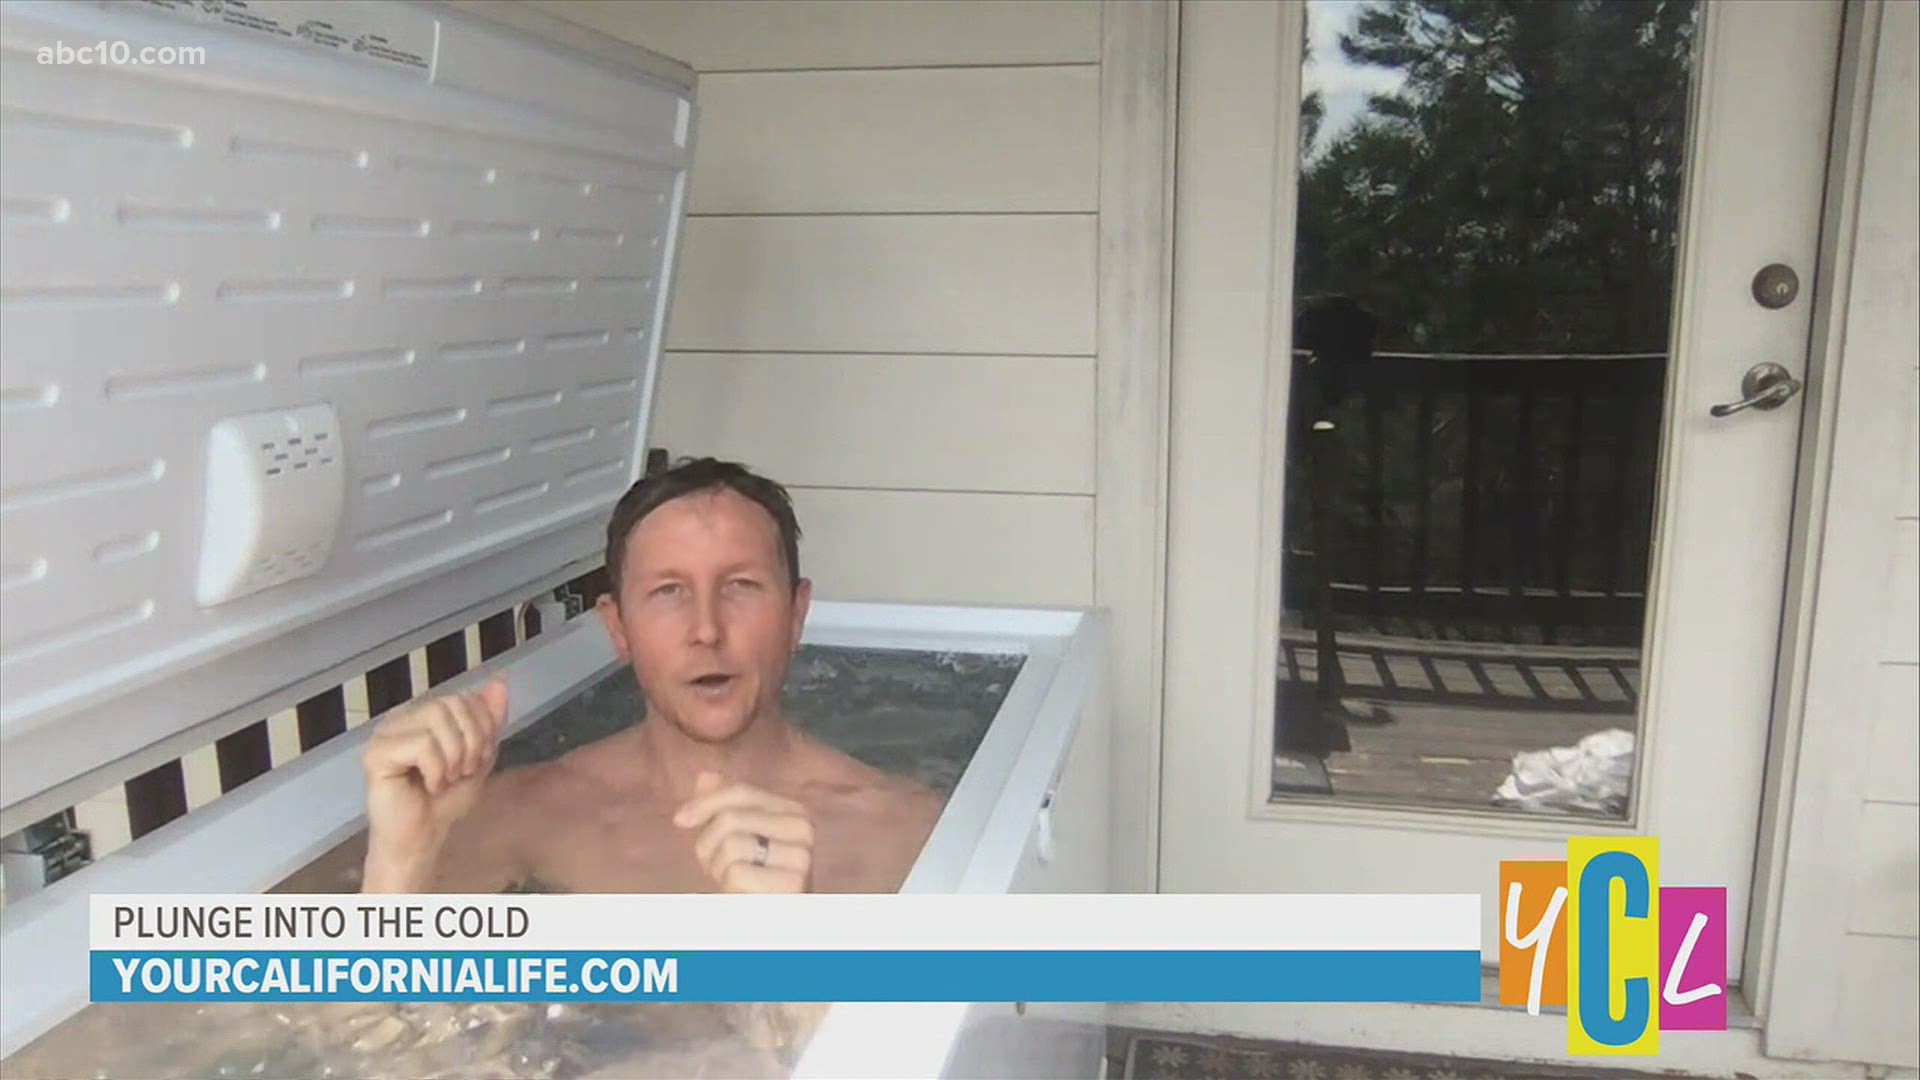 It’s time to chill out! Stay calm and hear about out the icy benefits that come with an immersive cold water plunge from Dr. Chad Walding.